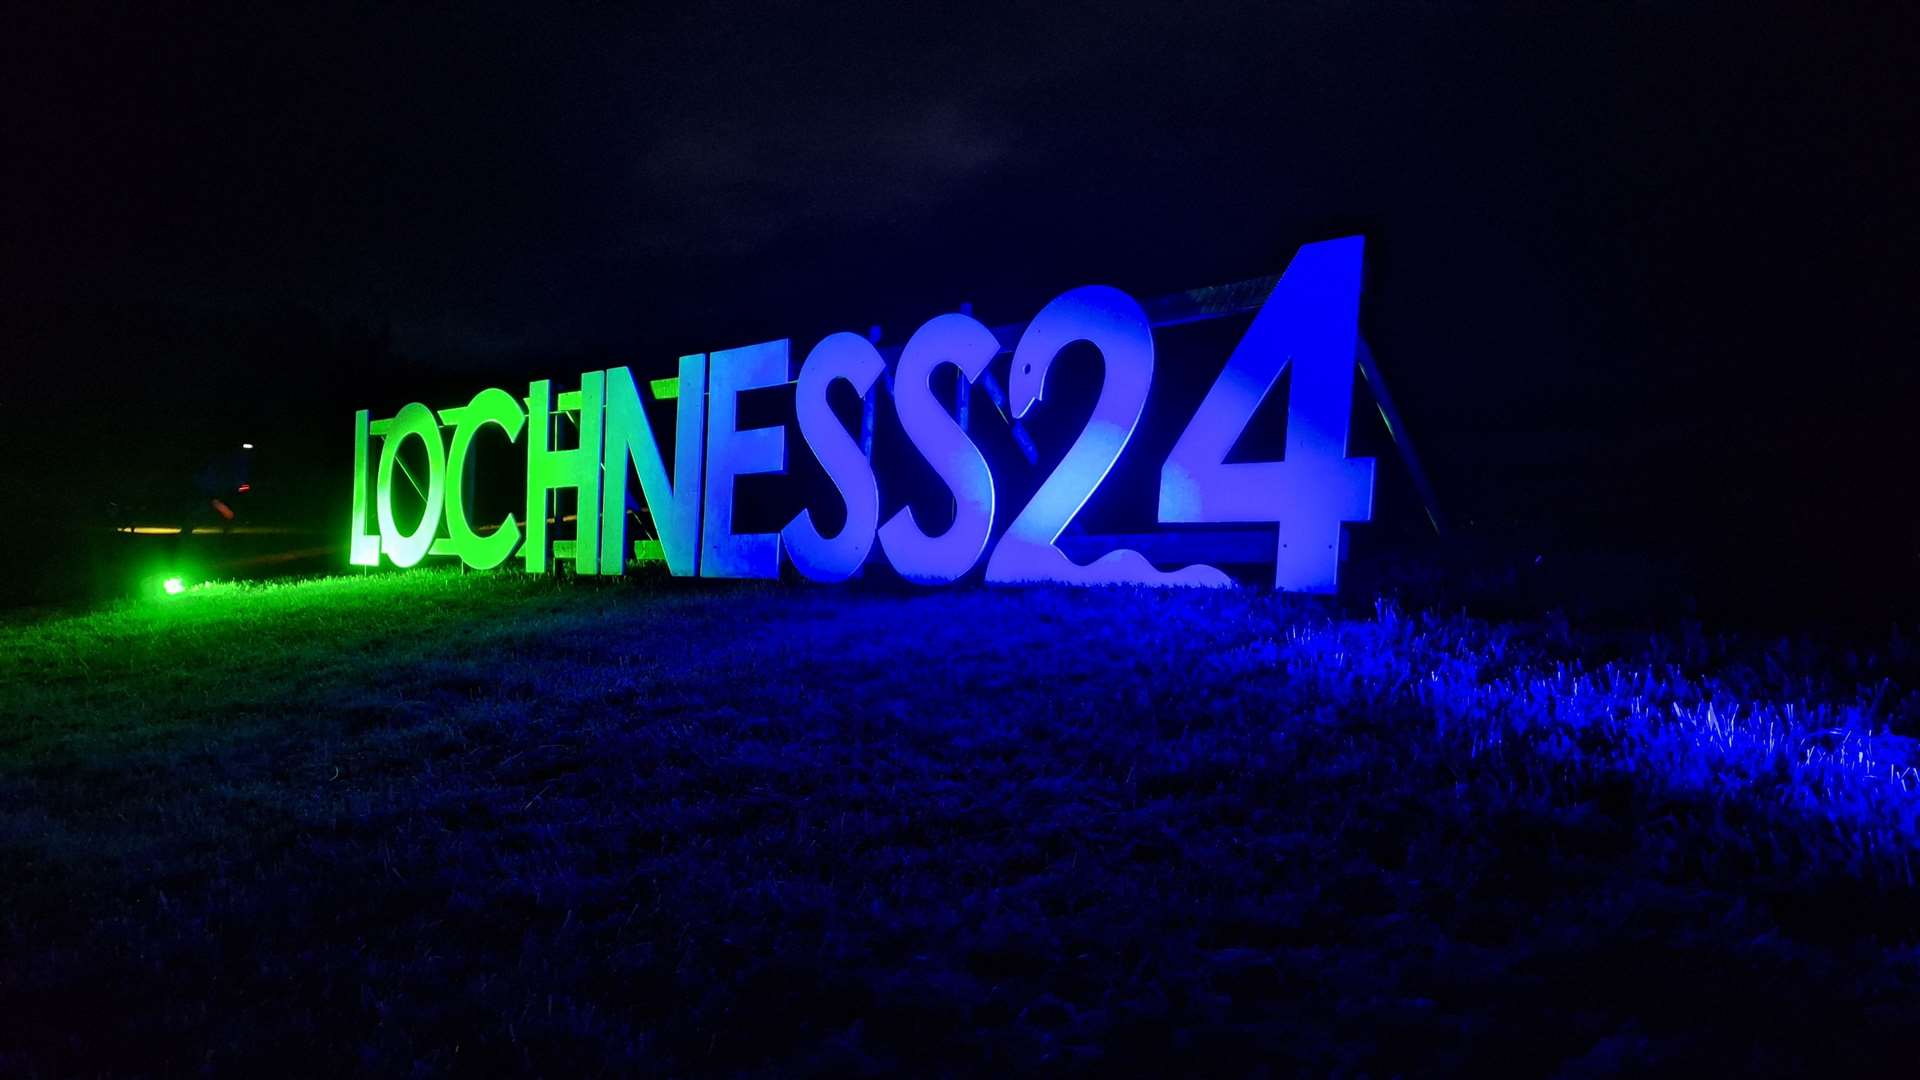 The Loch Ness 24 sign on the course was lit up during the hours of darkness. Picture: John Davidson